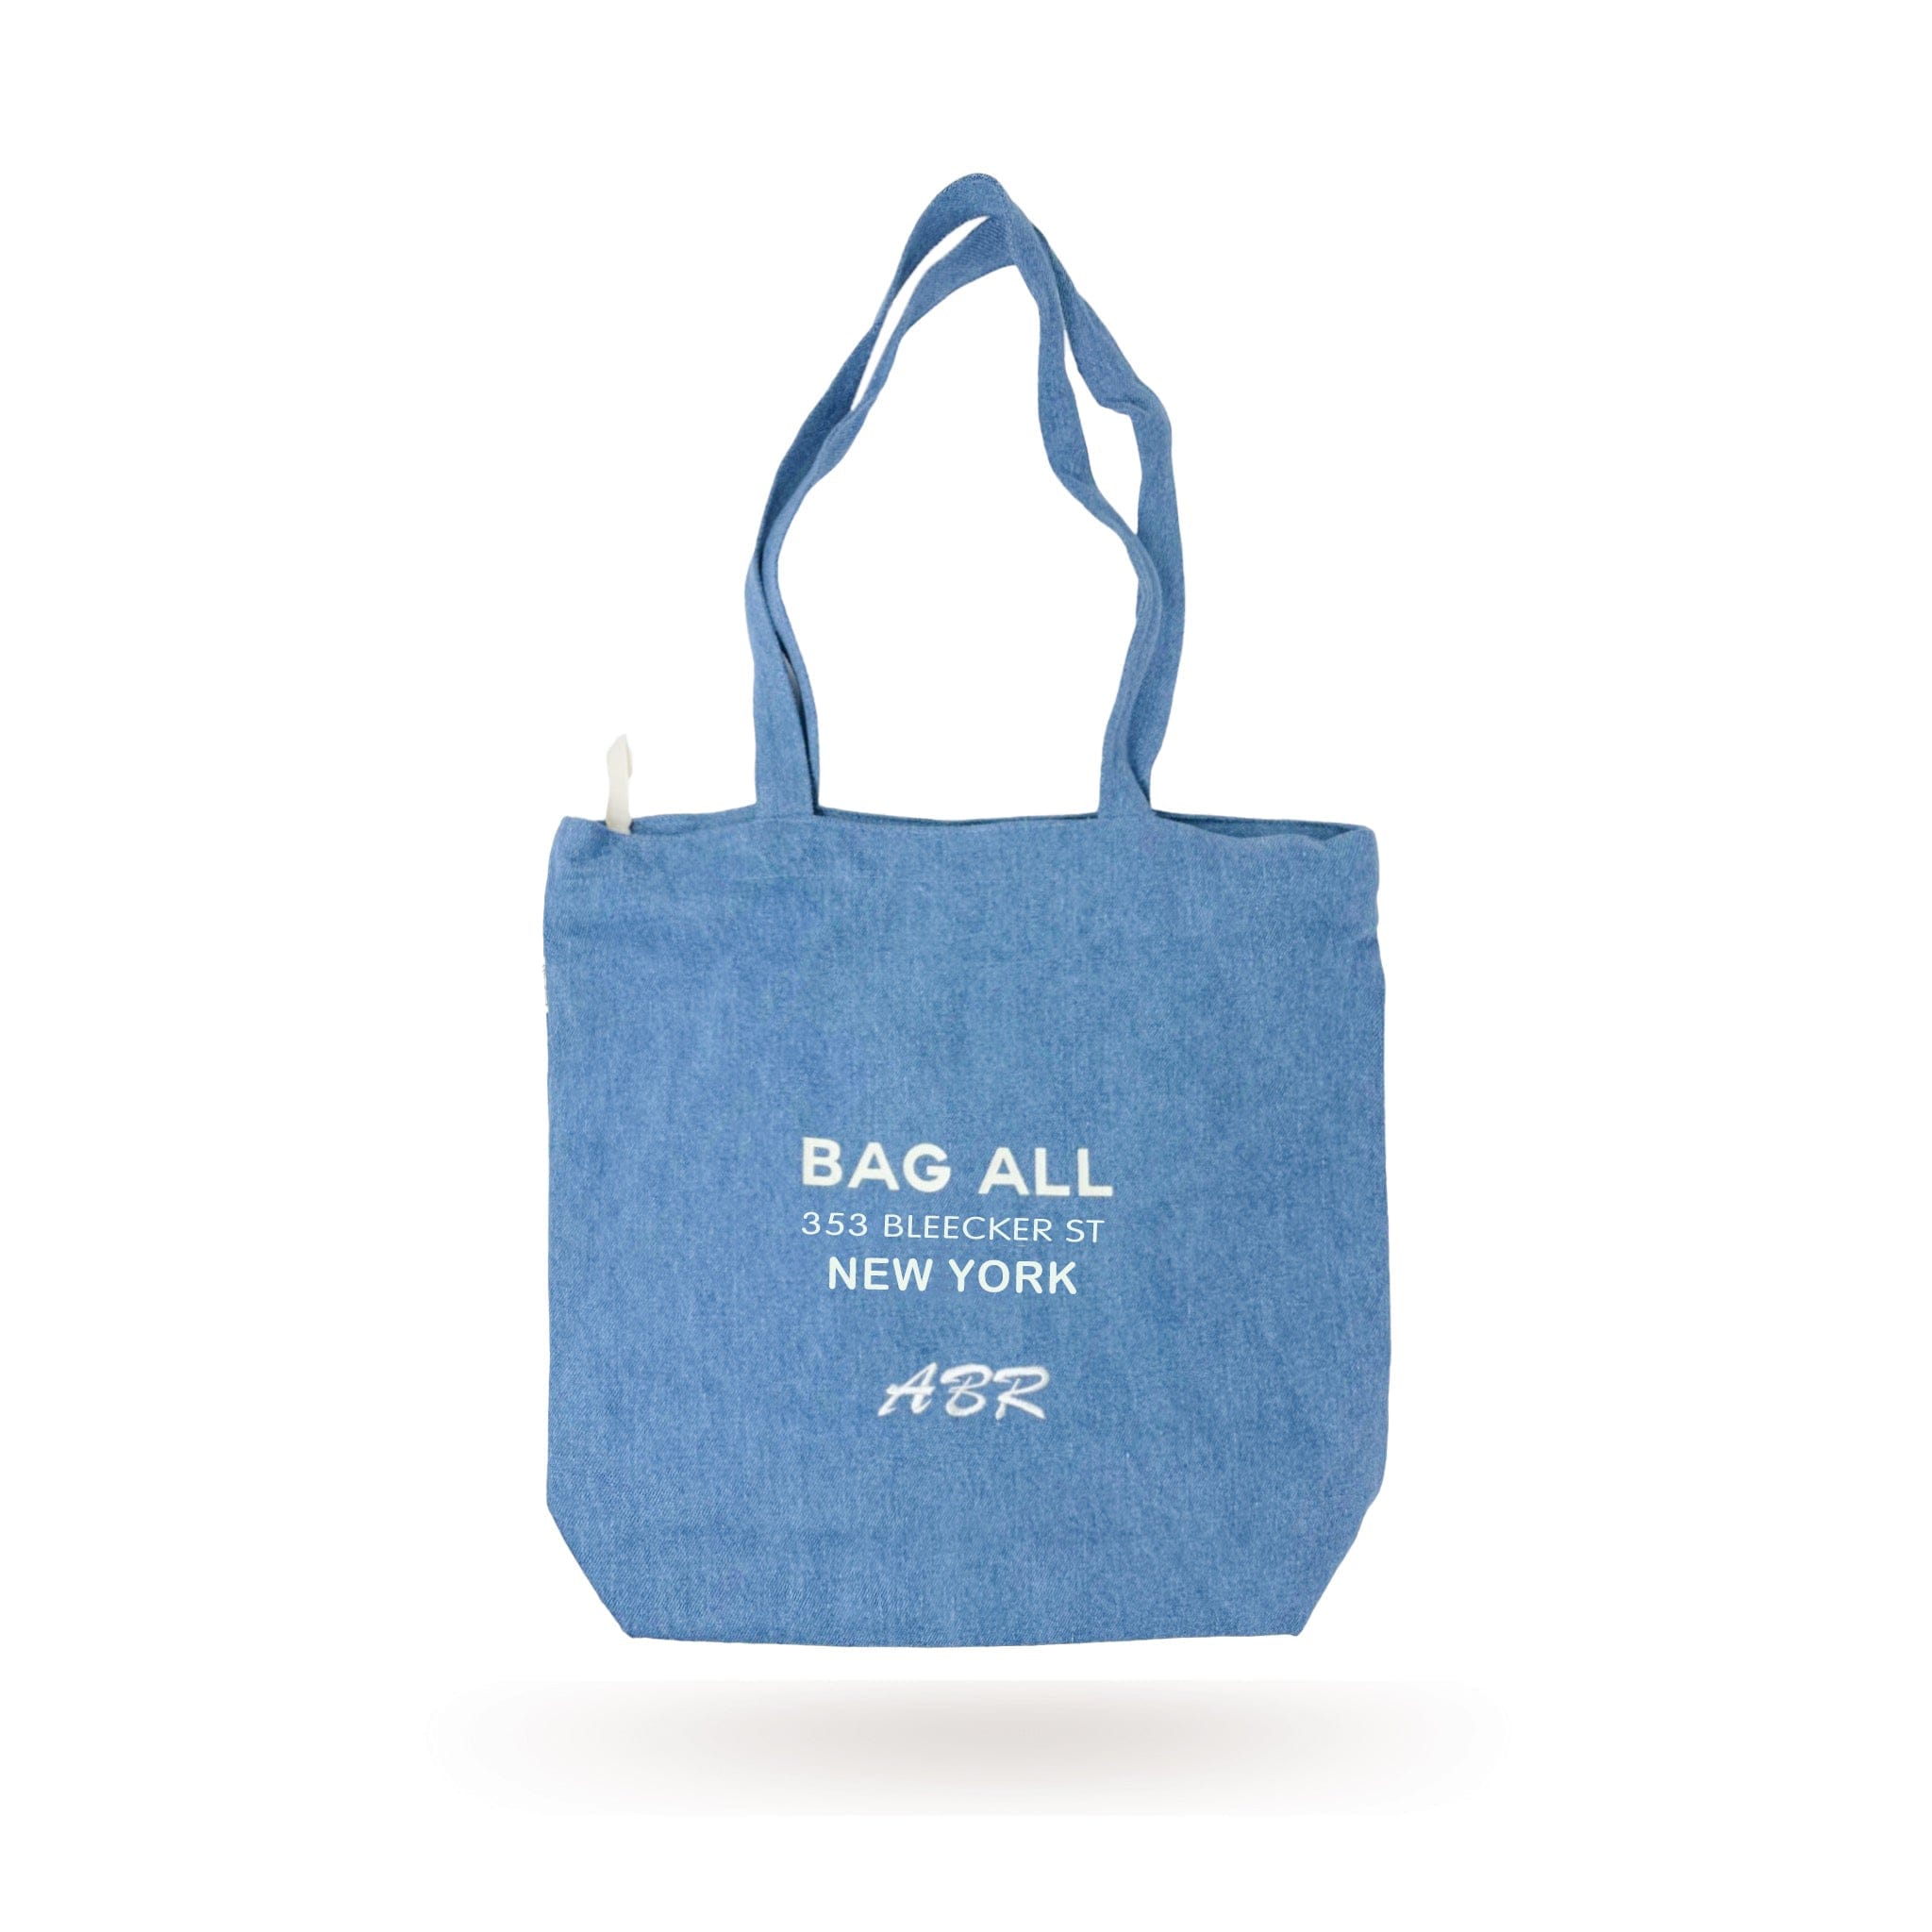 New York City Tote with Zipper and Inside Pocket, Denim | Bag-all